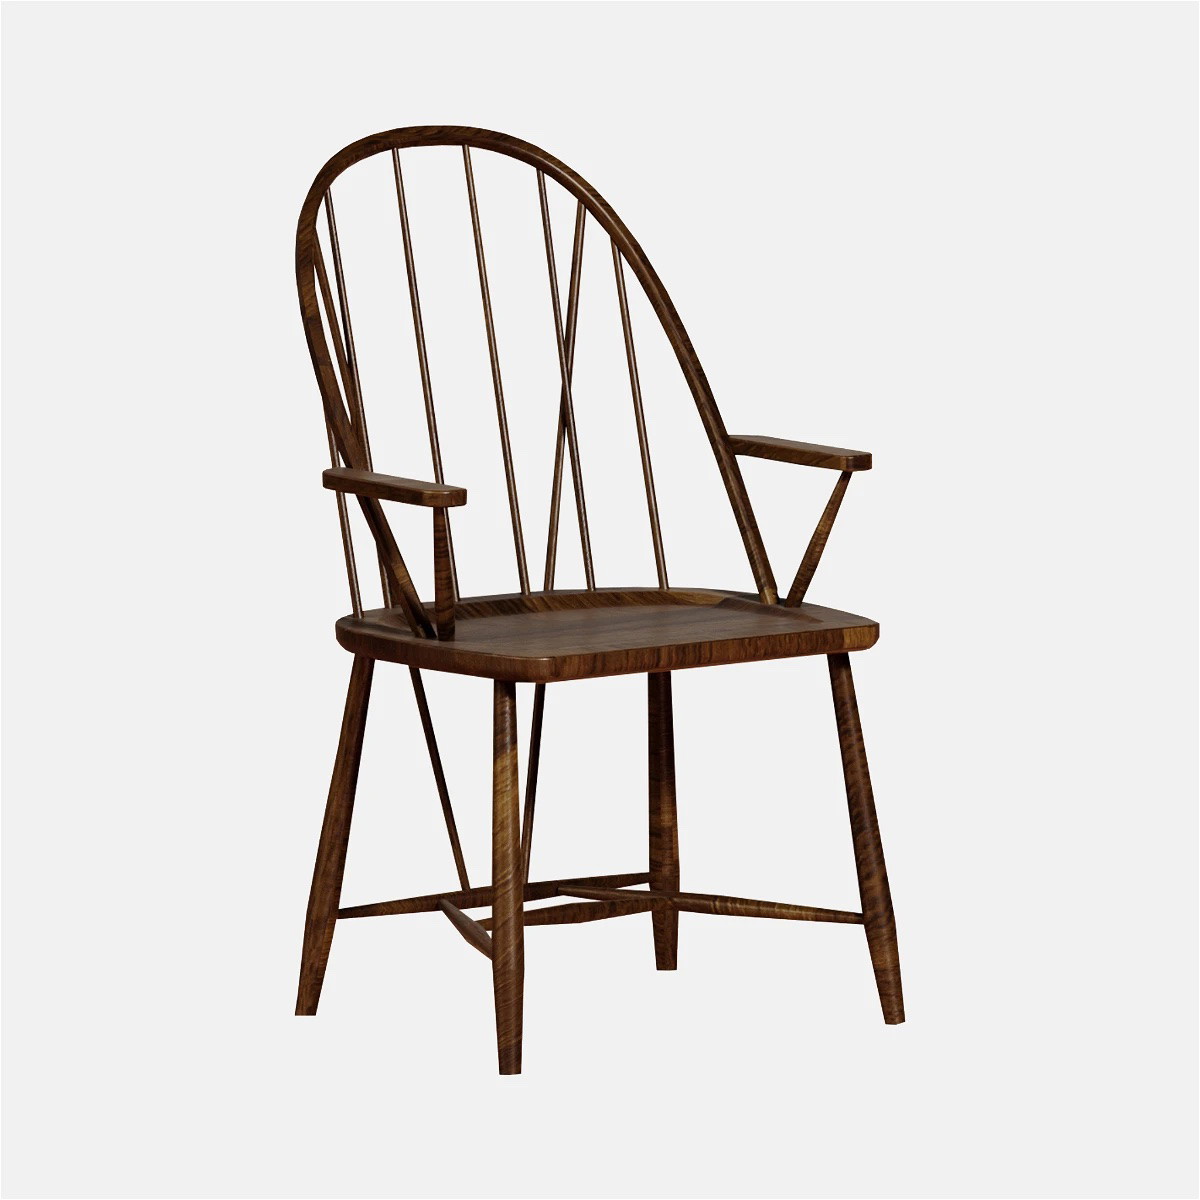 a wooden chair with a wooden seat